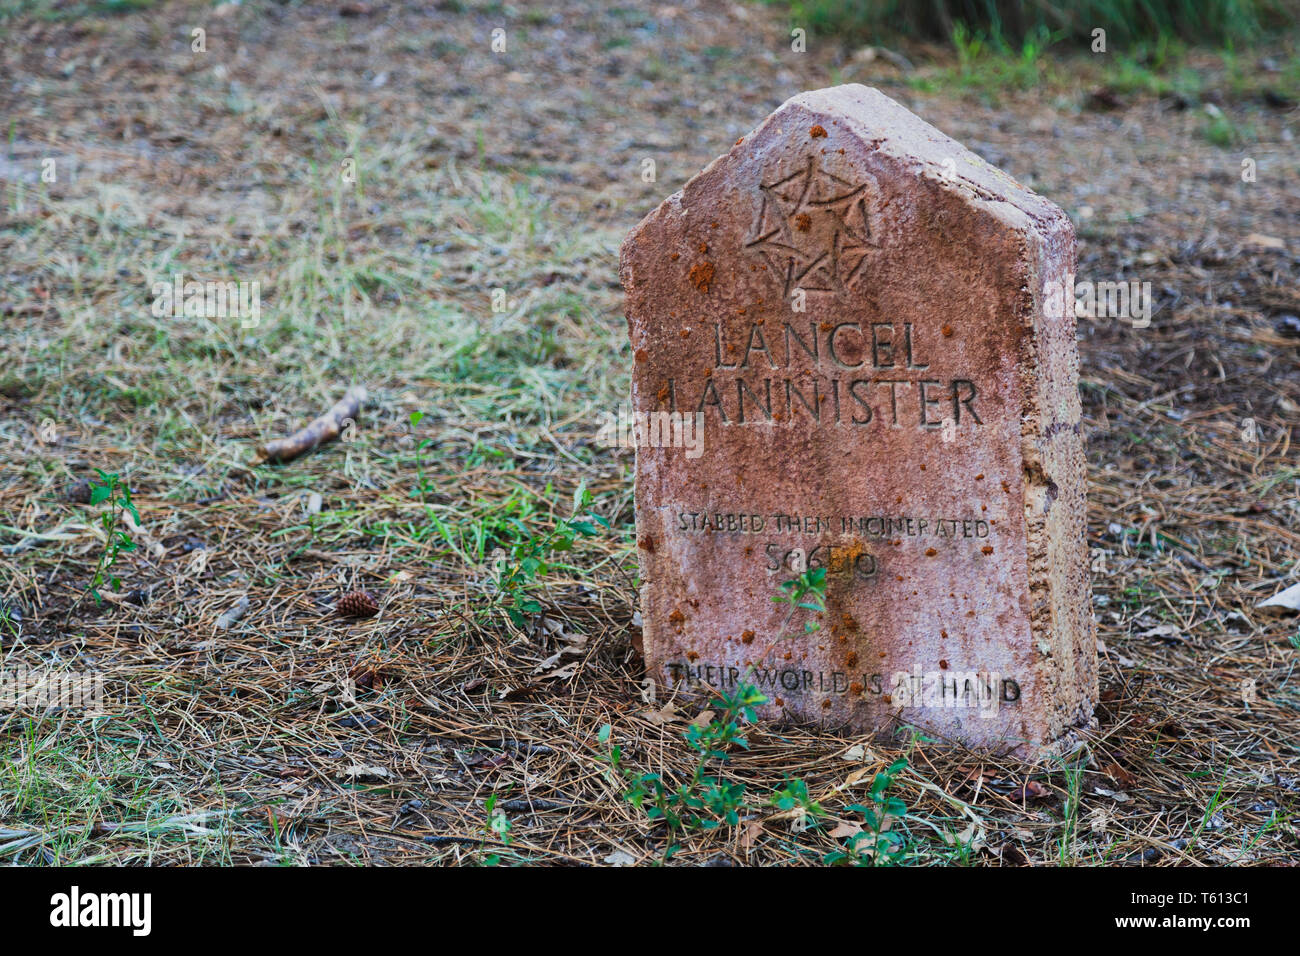 Sydney, Australia - 14 April 2019: Graveyards of Characters from popular TV show Game of Thones. Public  event in Sydney centennial park with free adm Stock Photo